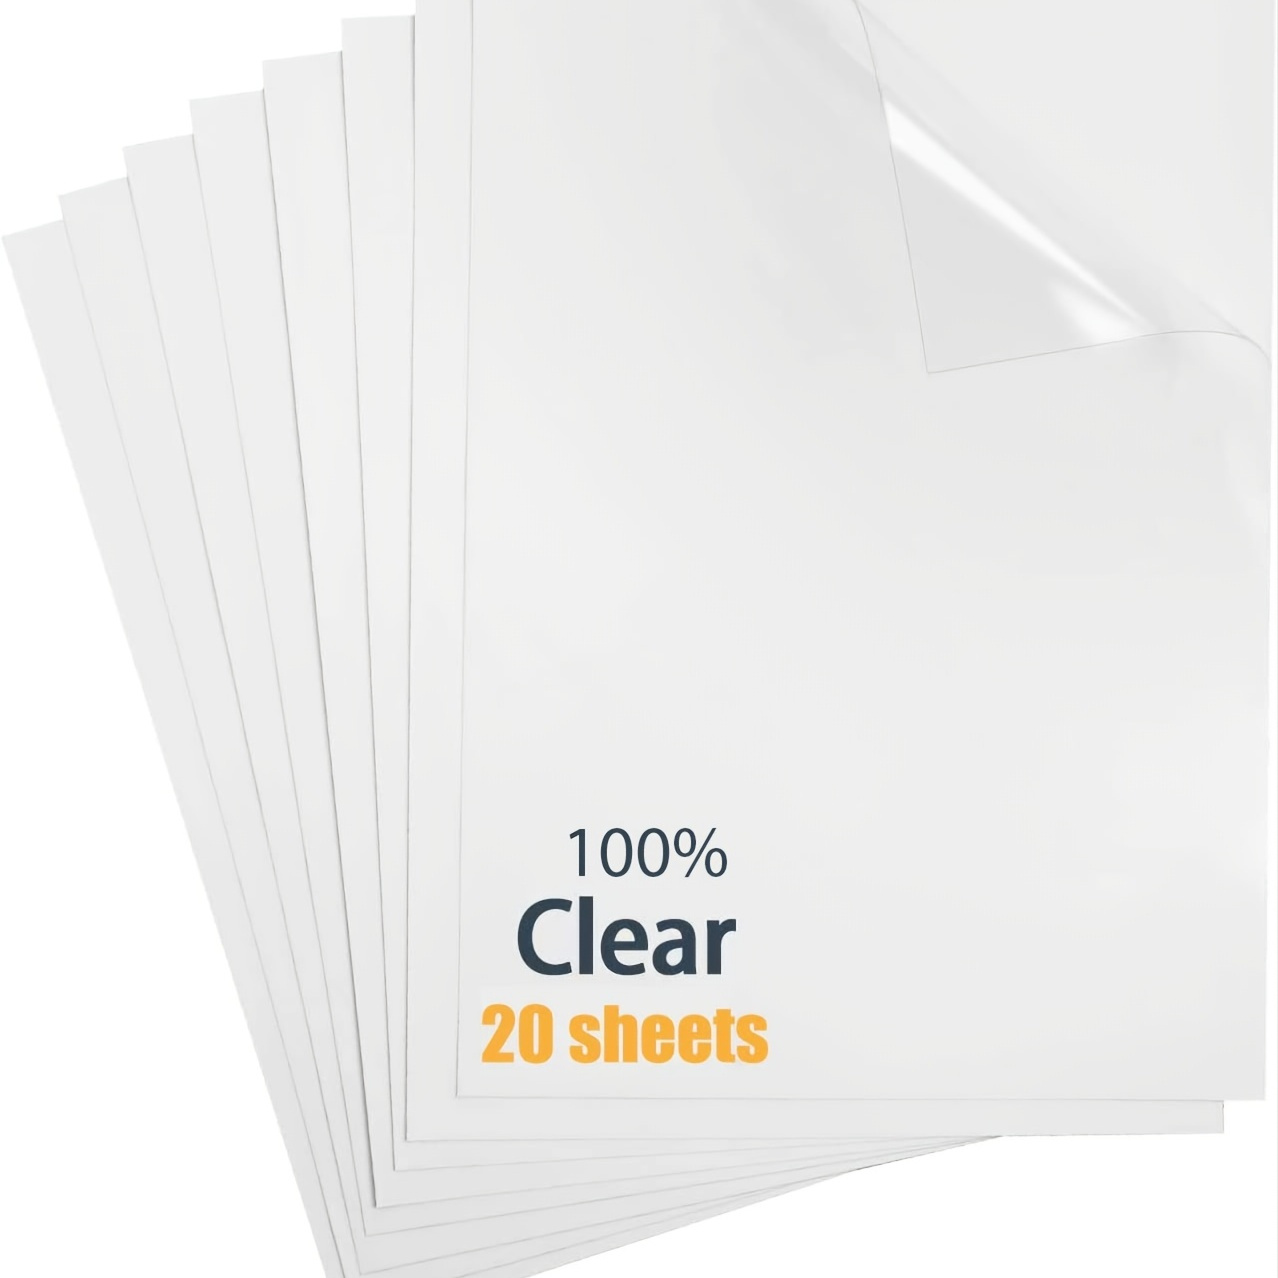  90% Clear Sticker Paper for Inkjet Printer (20 Sheets) -  Transparent Glossy 8.5 x 11 - Printable Vinyl - Clear Sticker Paper - Clear  Vinyl Sticker Paper - Clear Sticker Printer Paper : Office Products